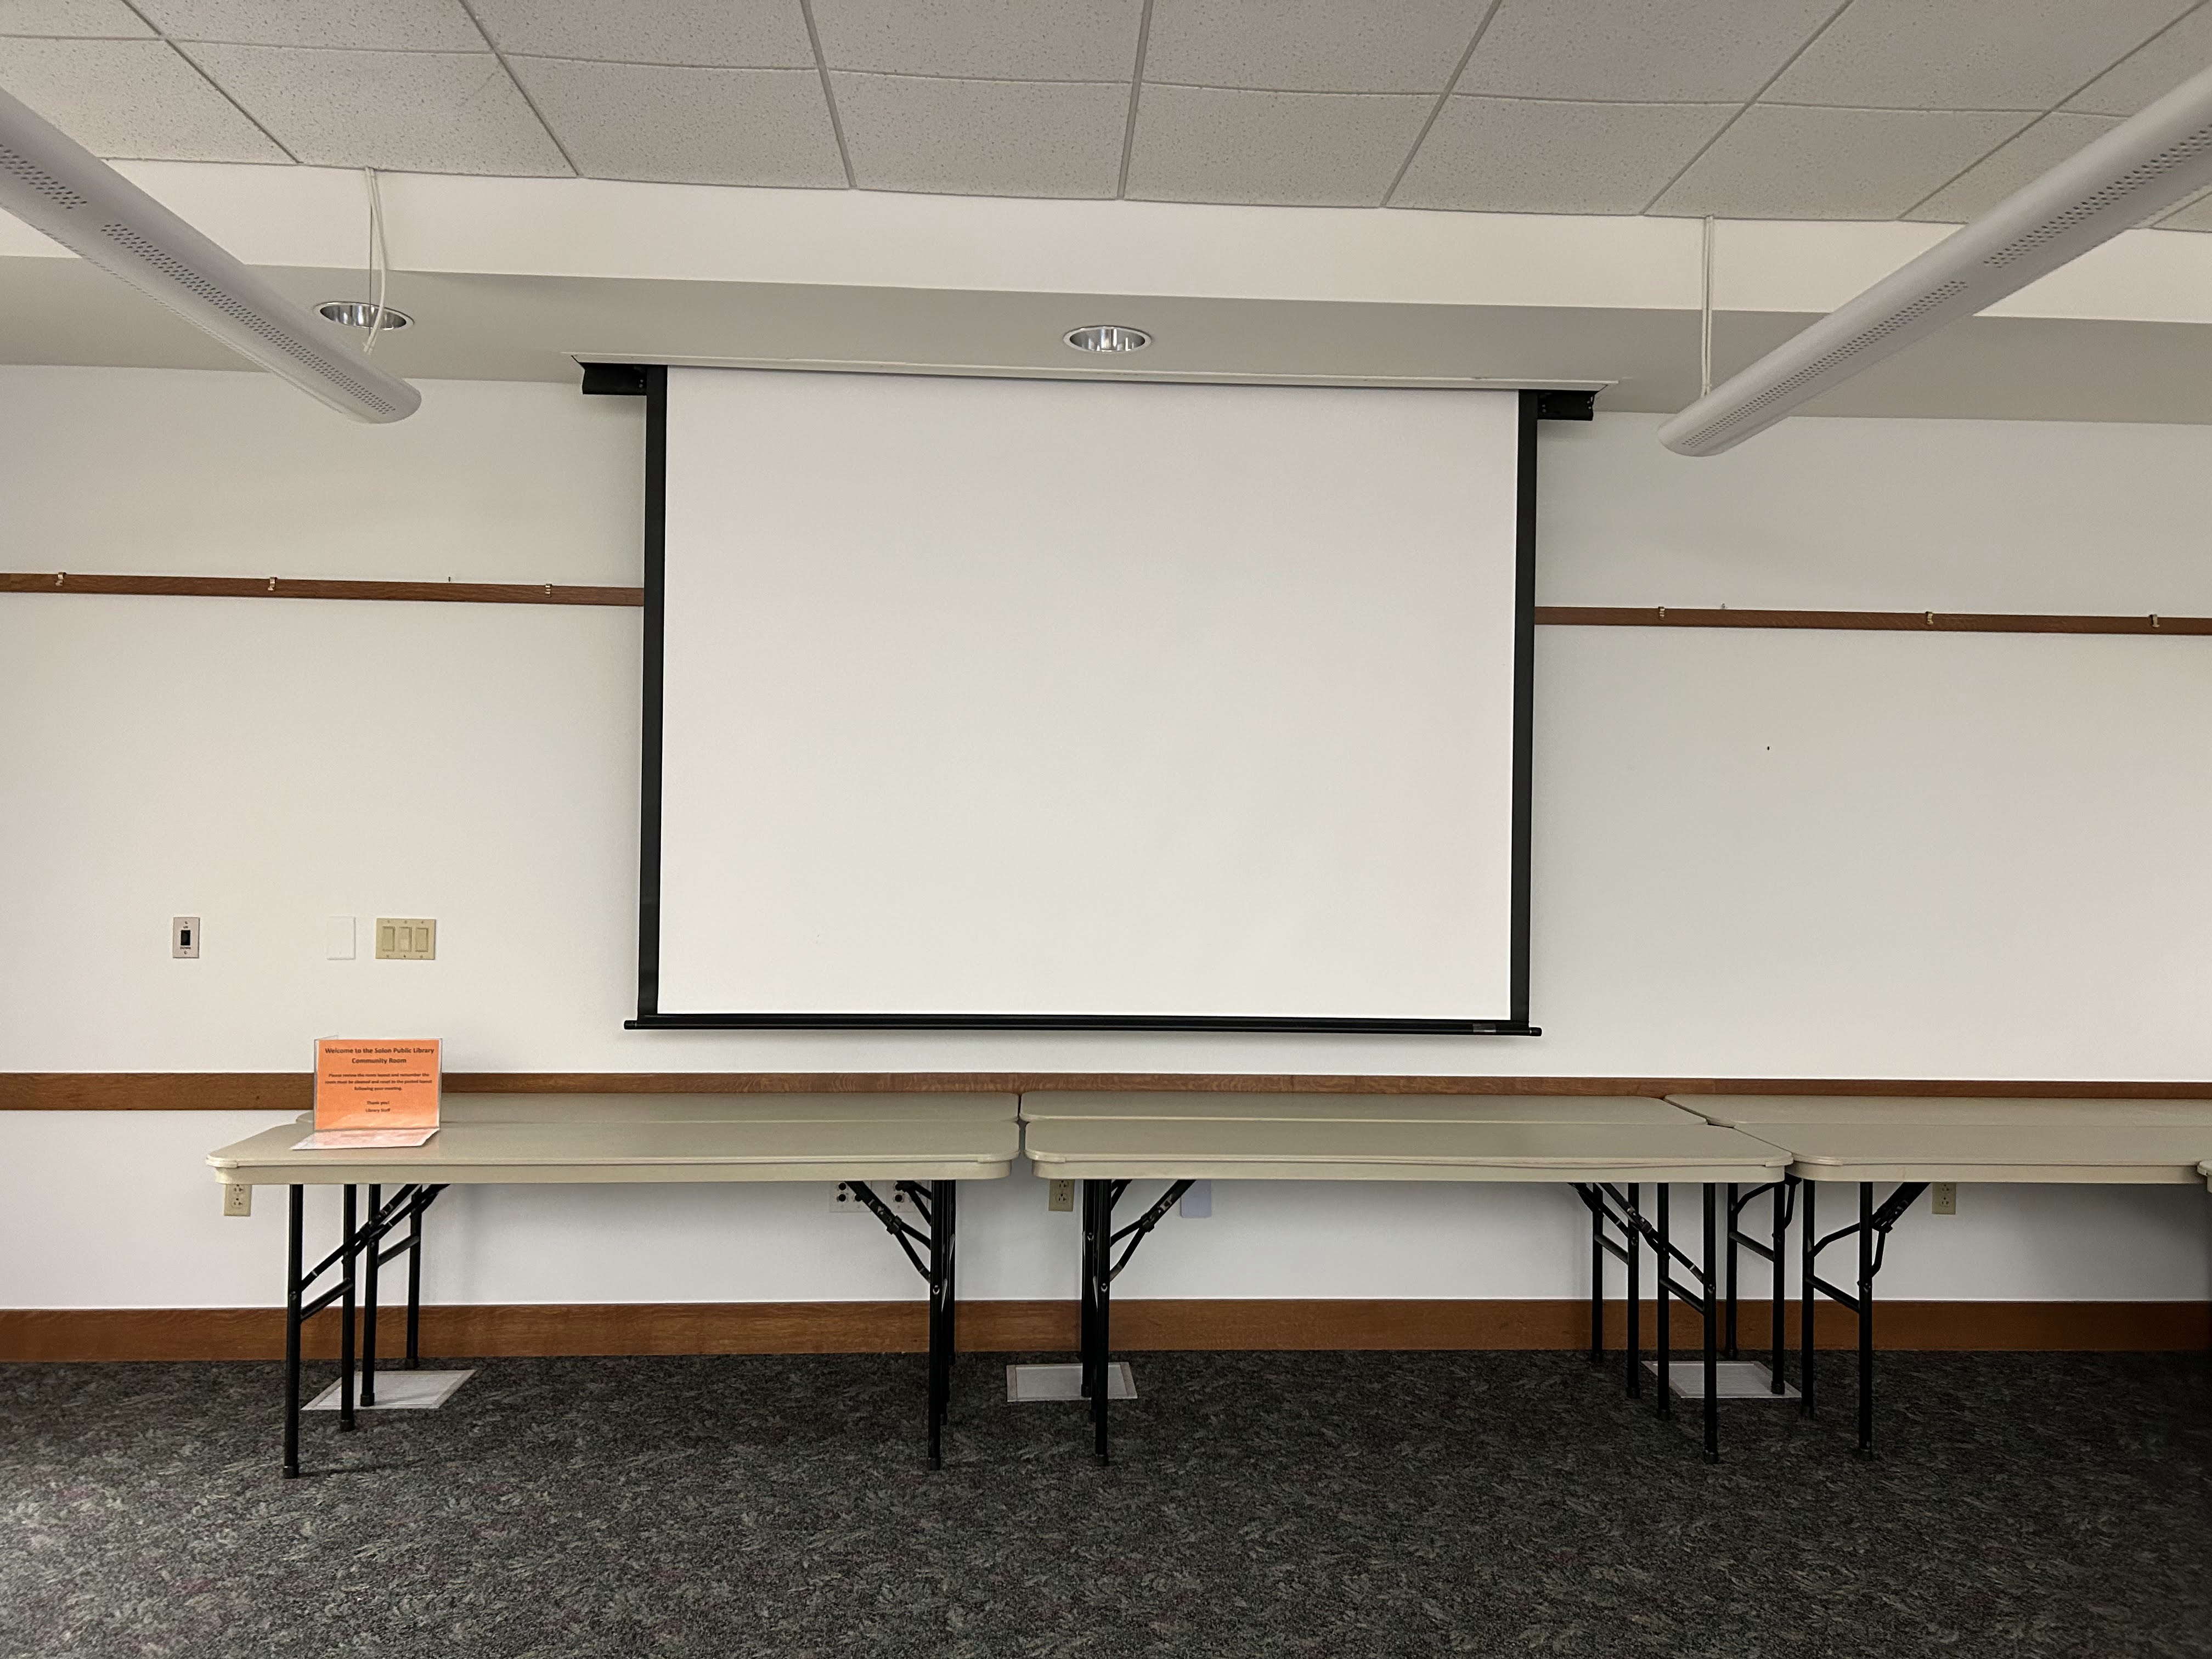 Photo of the community meeting room's projector screen, available upon request.